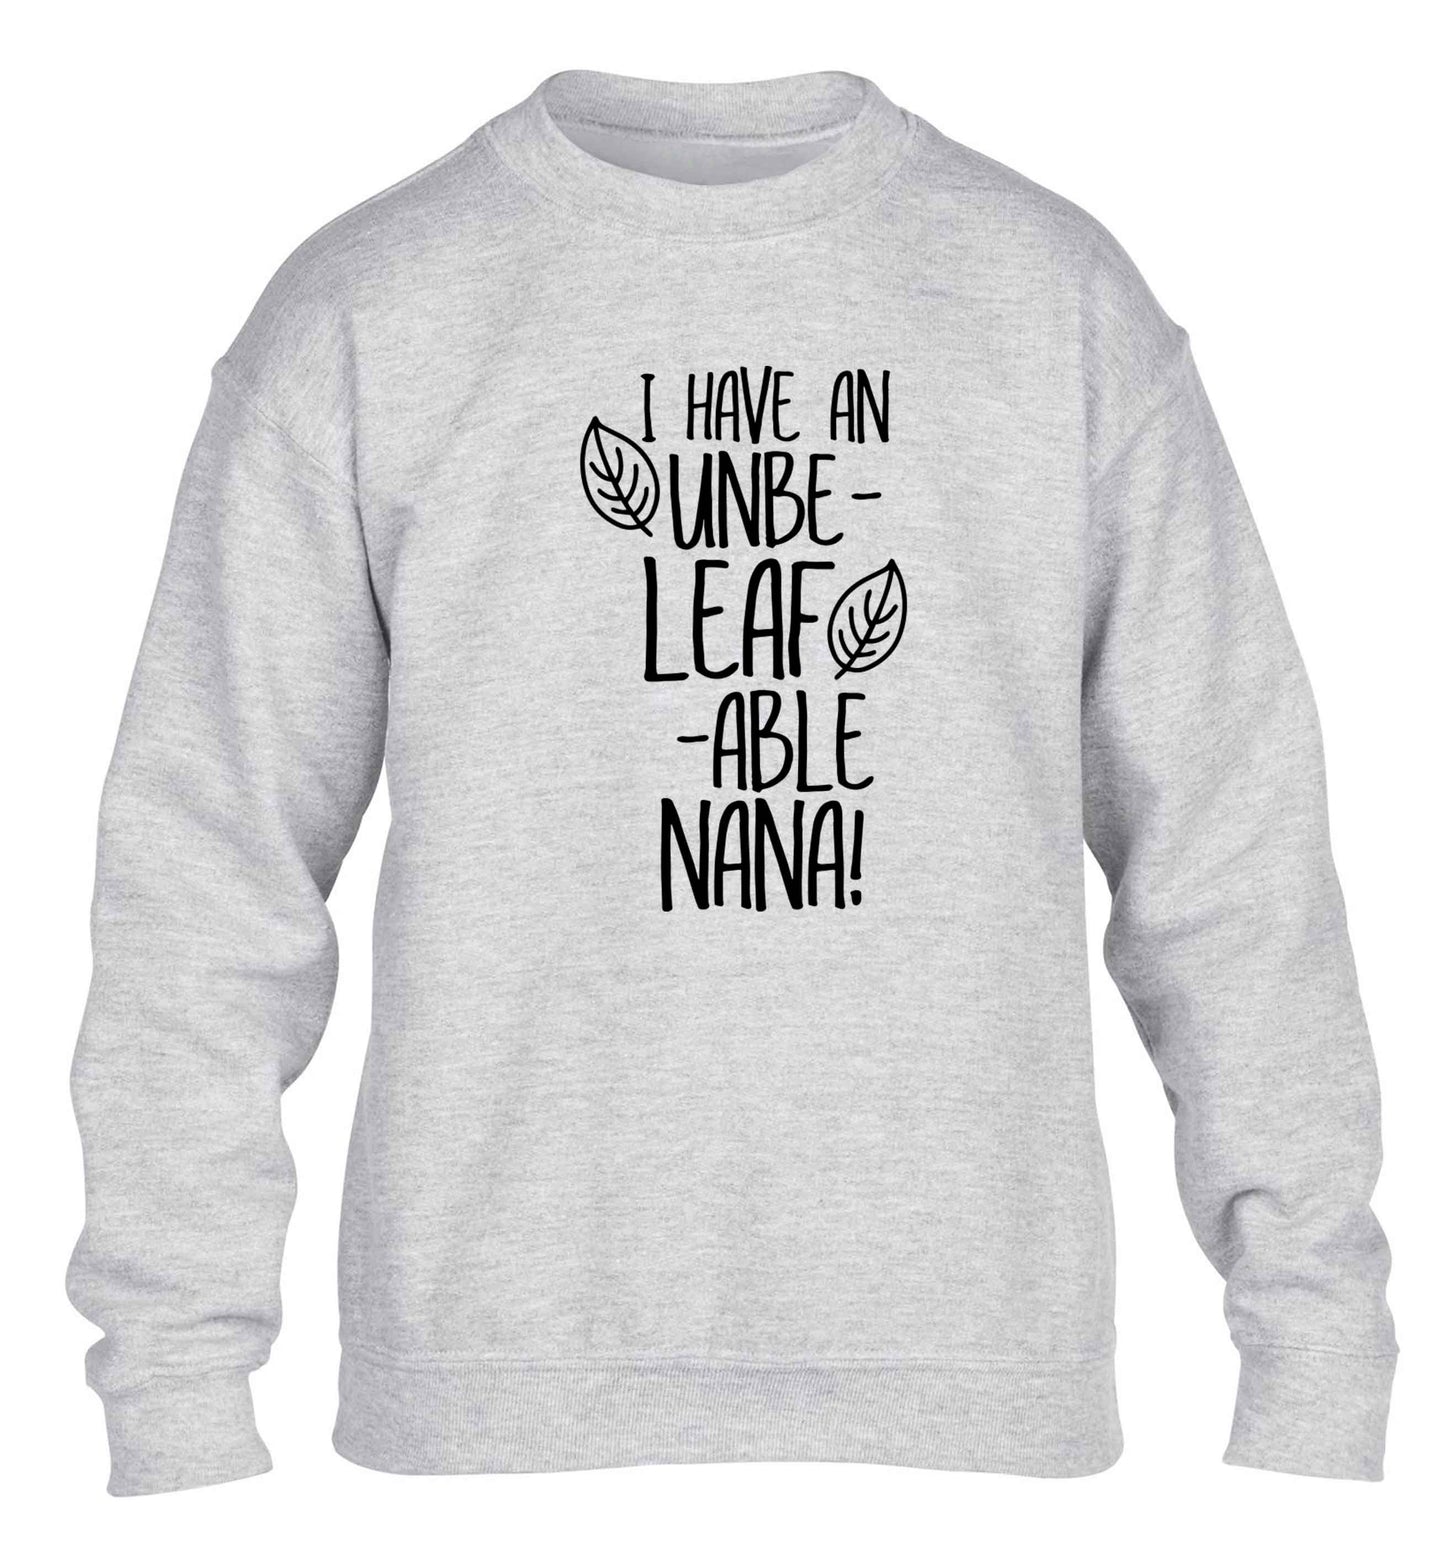 I have an unbe-leaf-able nana children's grey sweater 12-13 Years